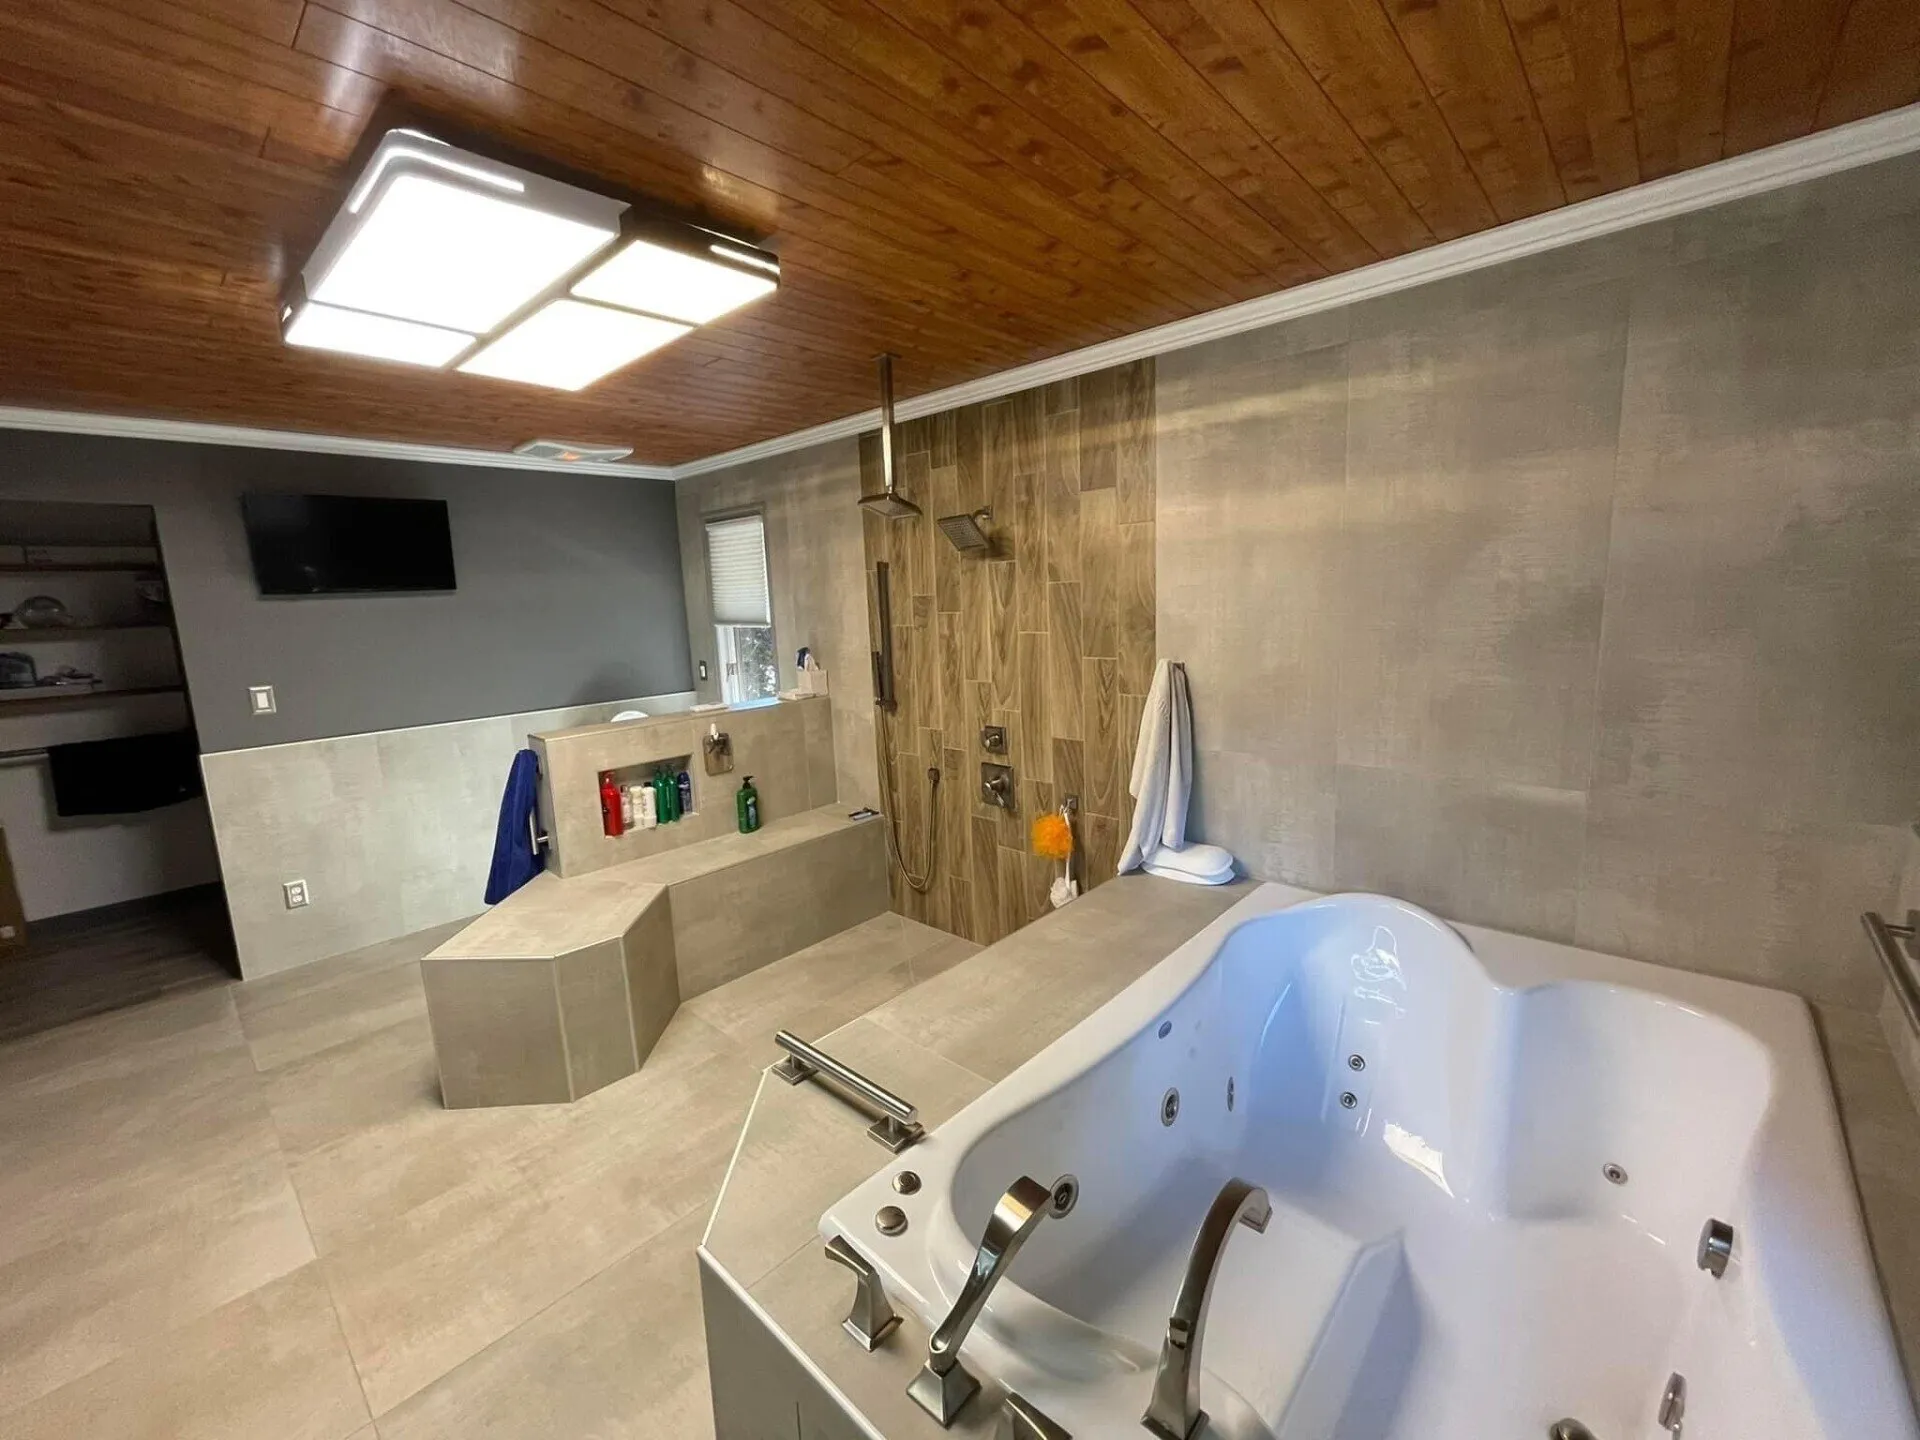 A large bathroom with a tub and shower.